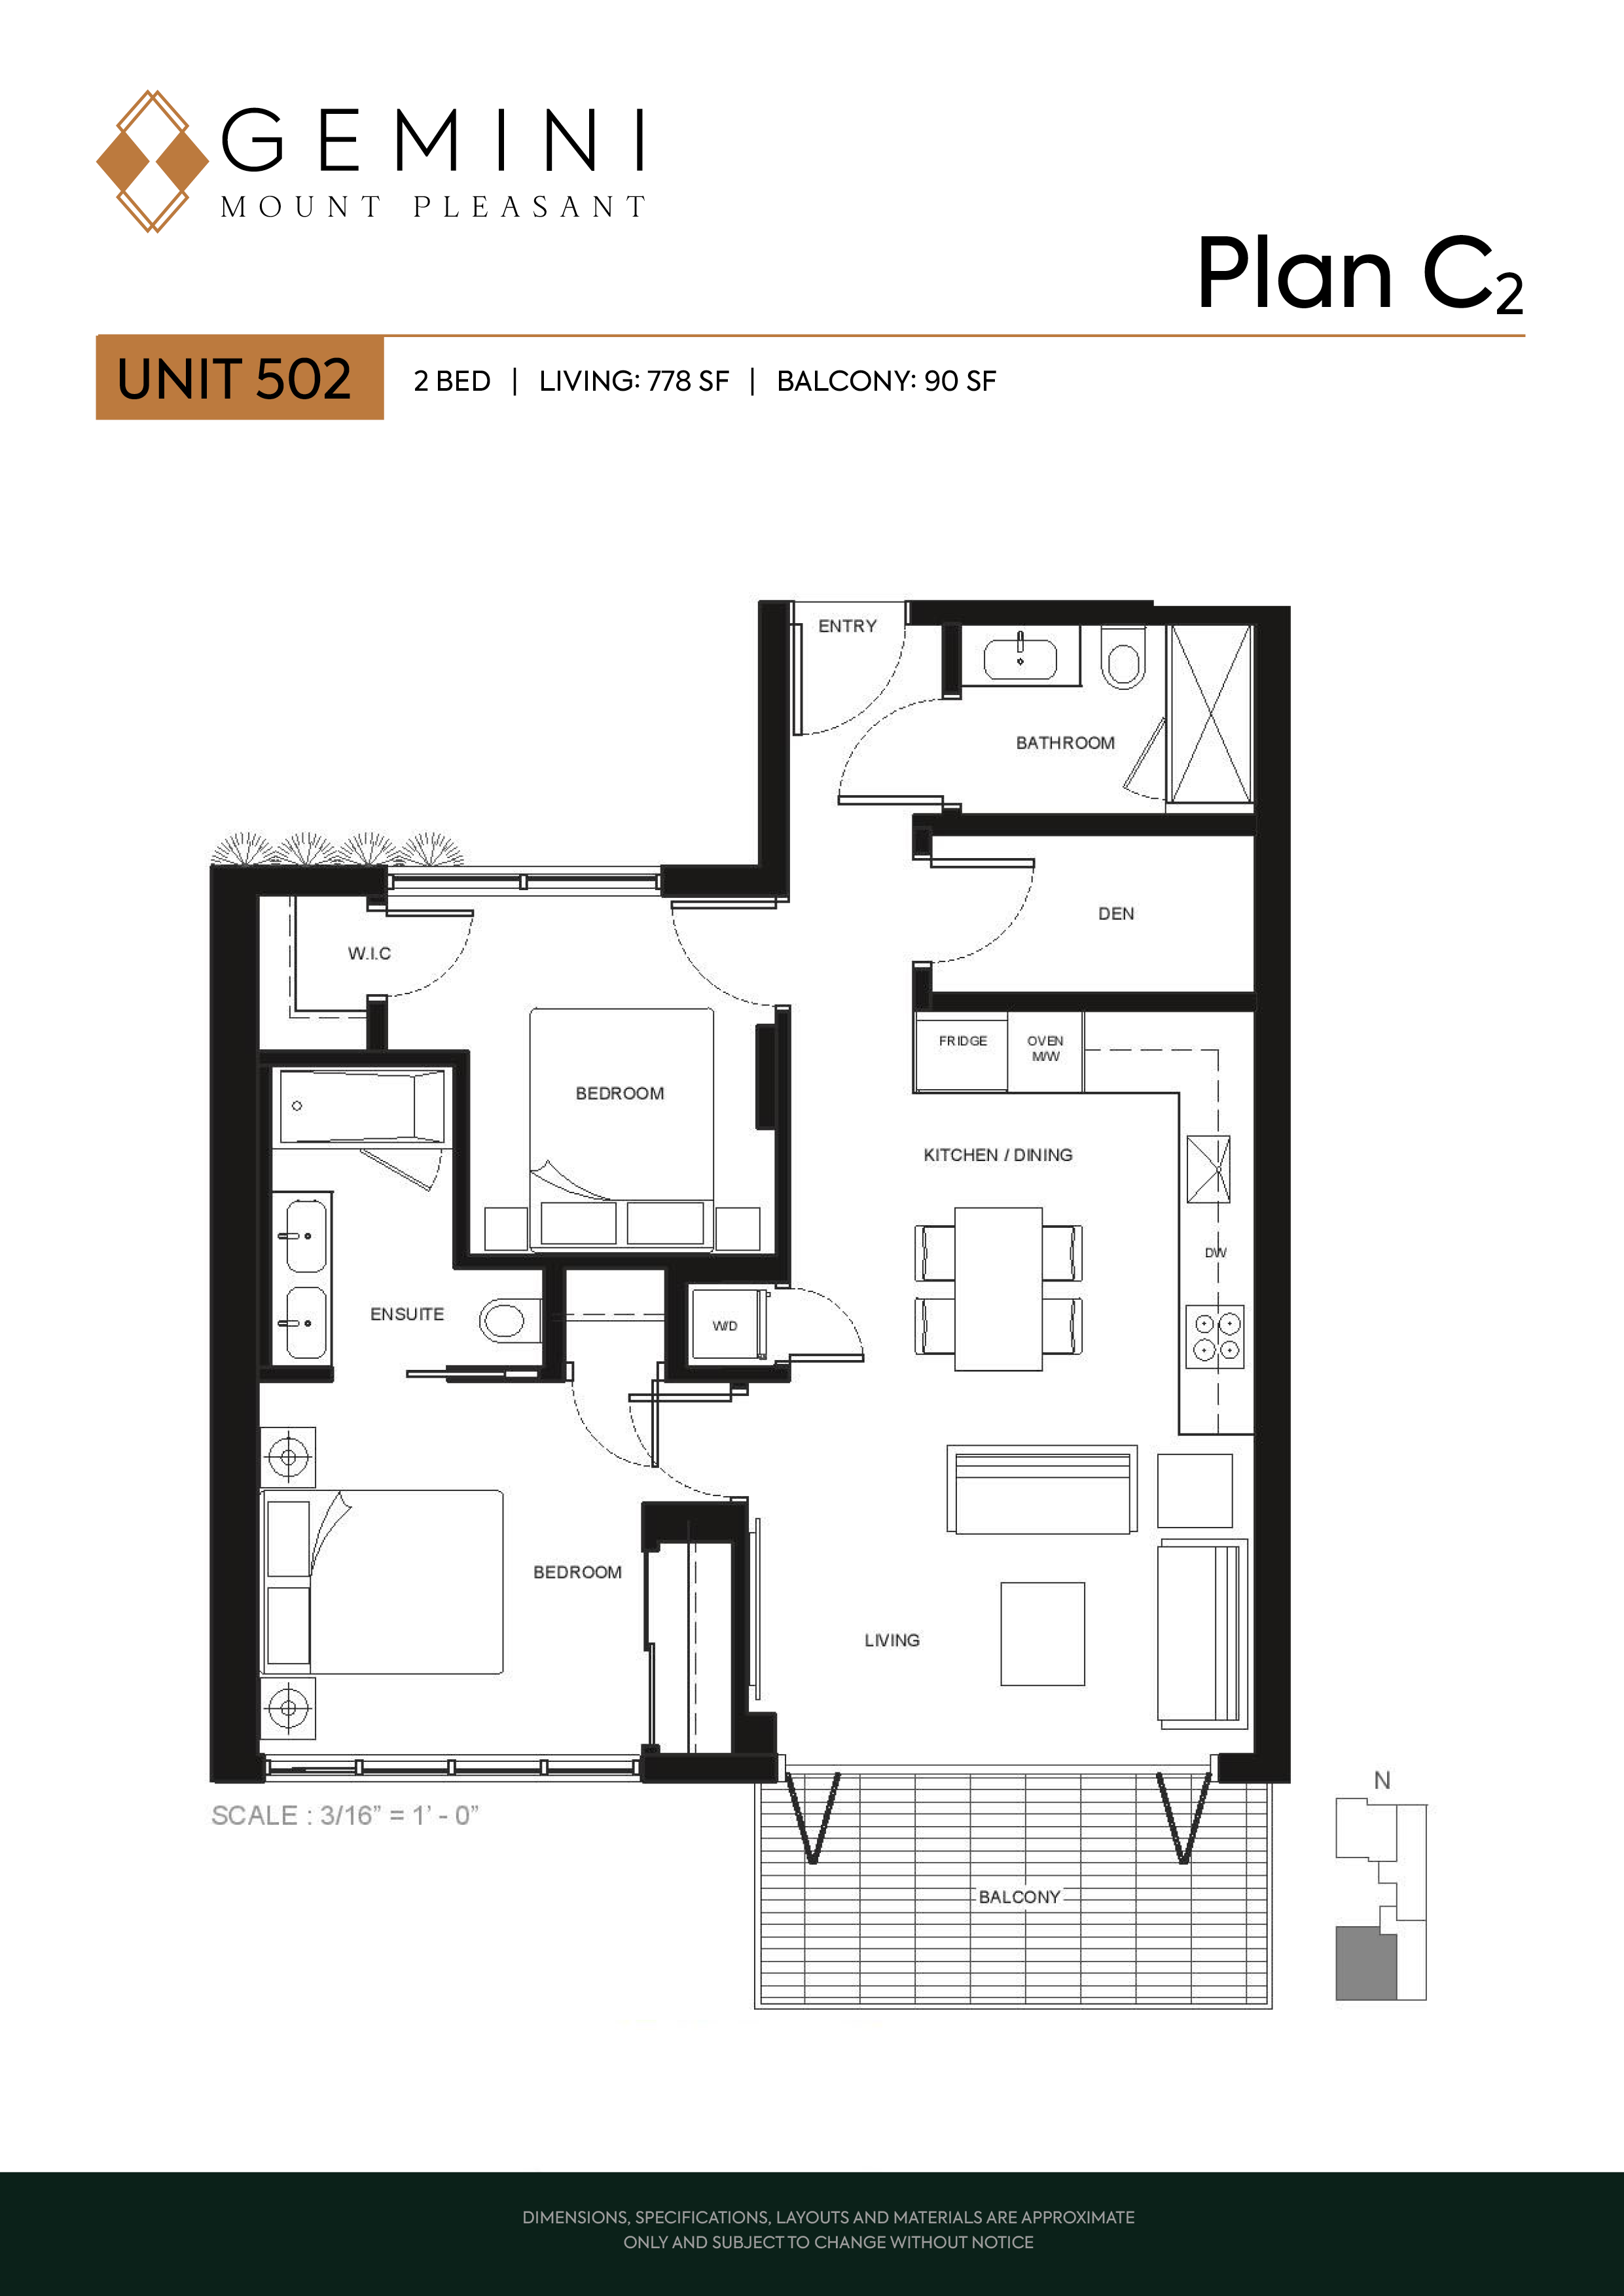 Plan C2 Floor Plan of Gemini Mount Pleasant Condos with undefined beds